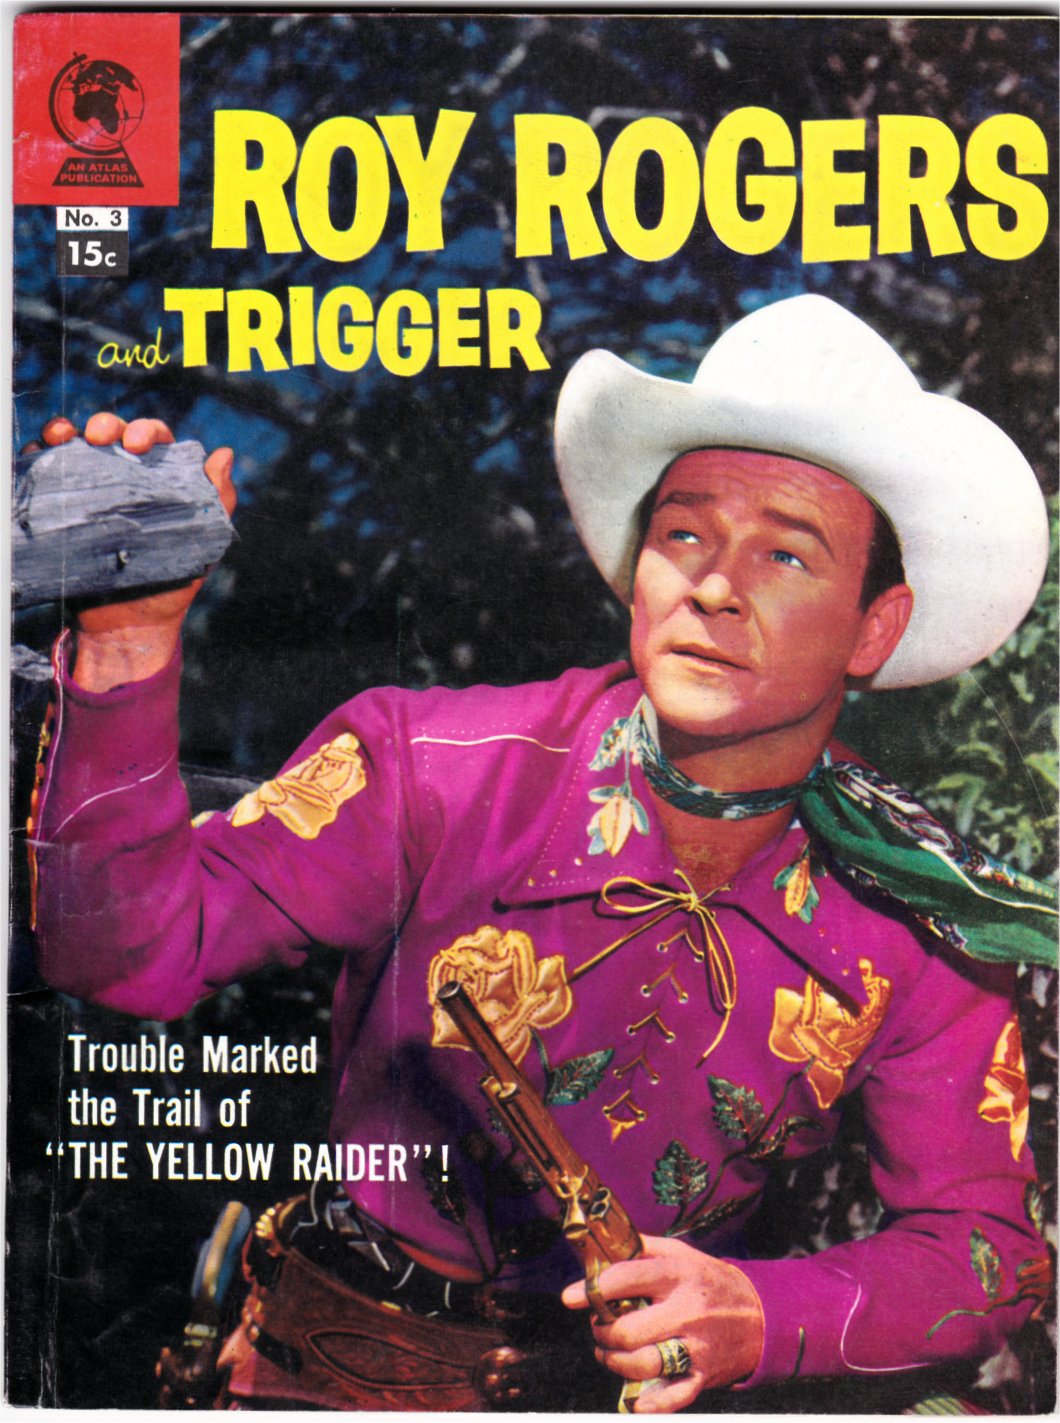 South African Comic Books: Atlas Publications Roy Rogers and Trigger Series